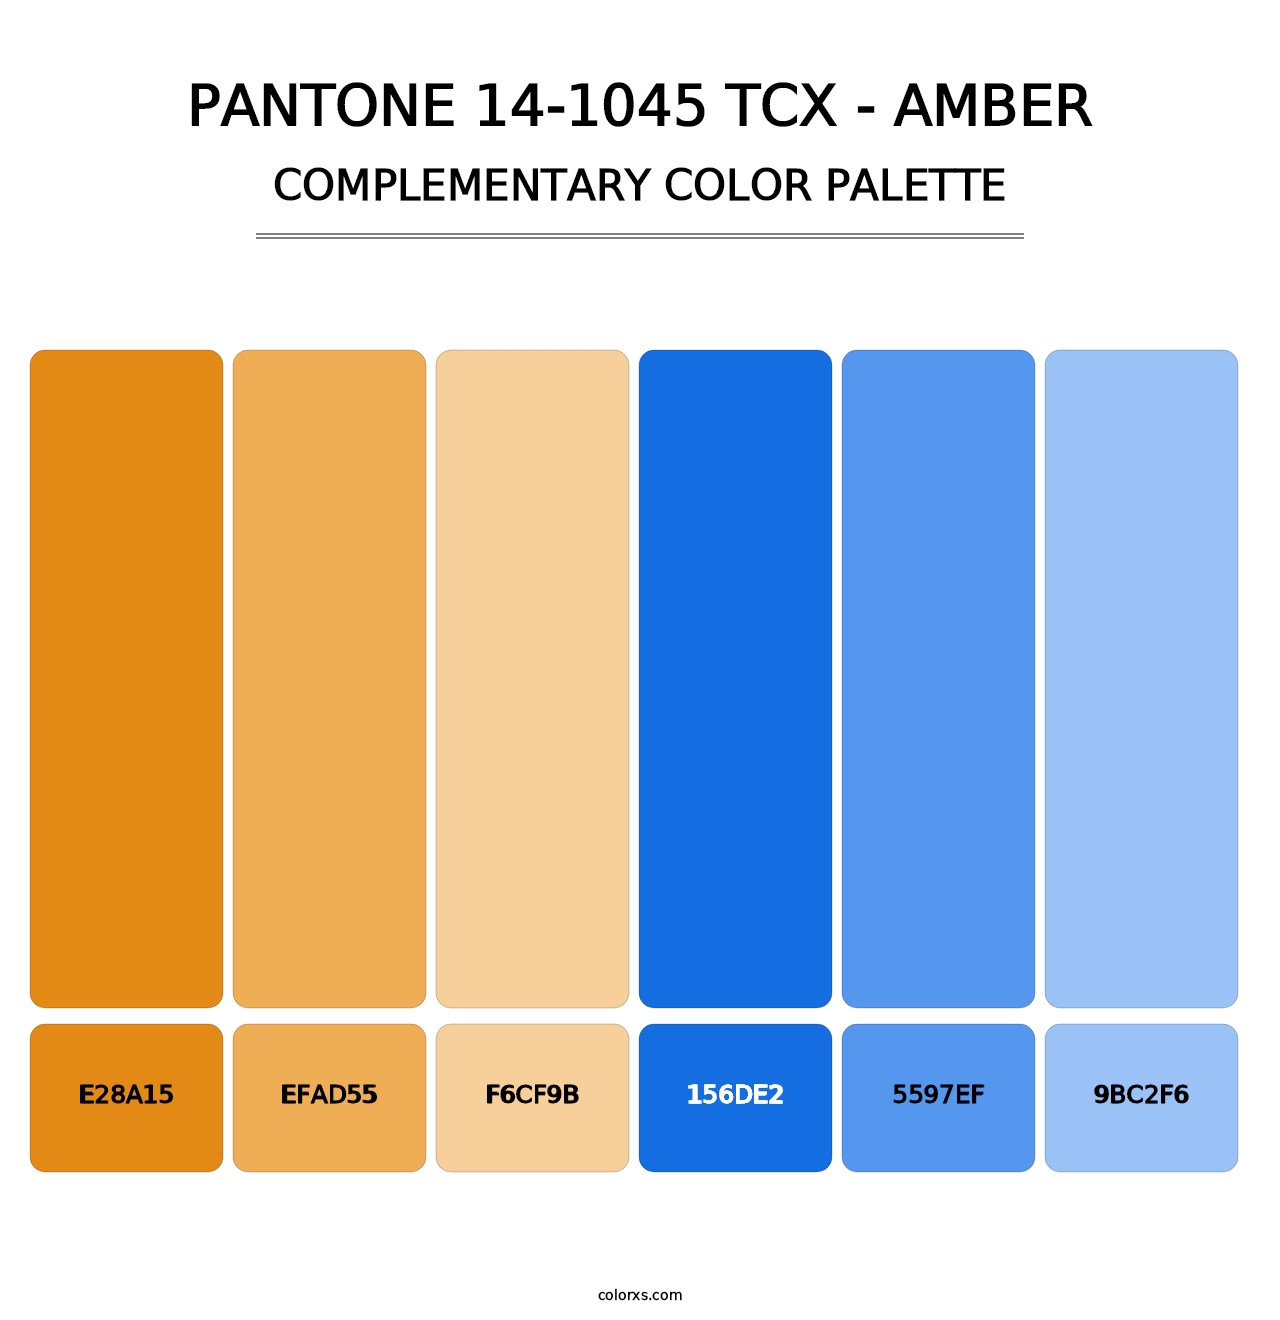 PANTONE 14-1045 TCX - Amber - Complementary Color Palette